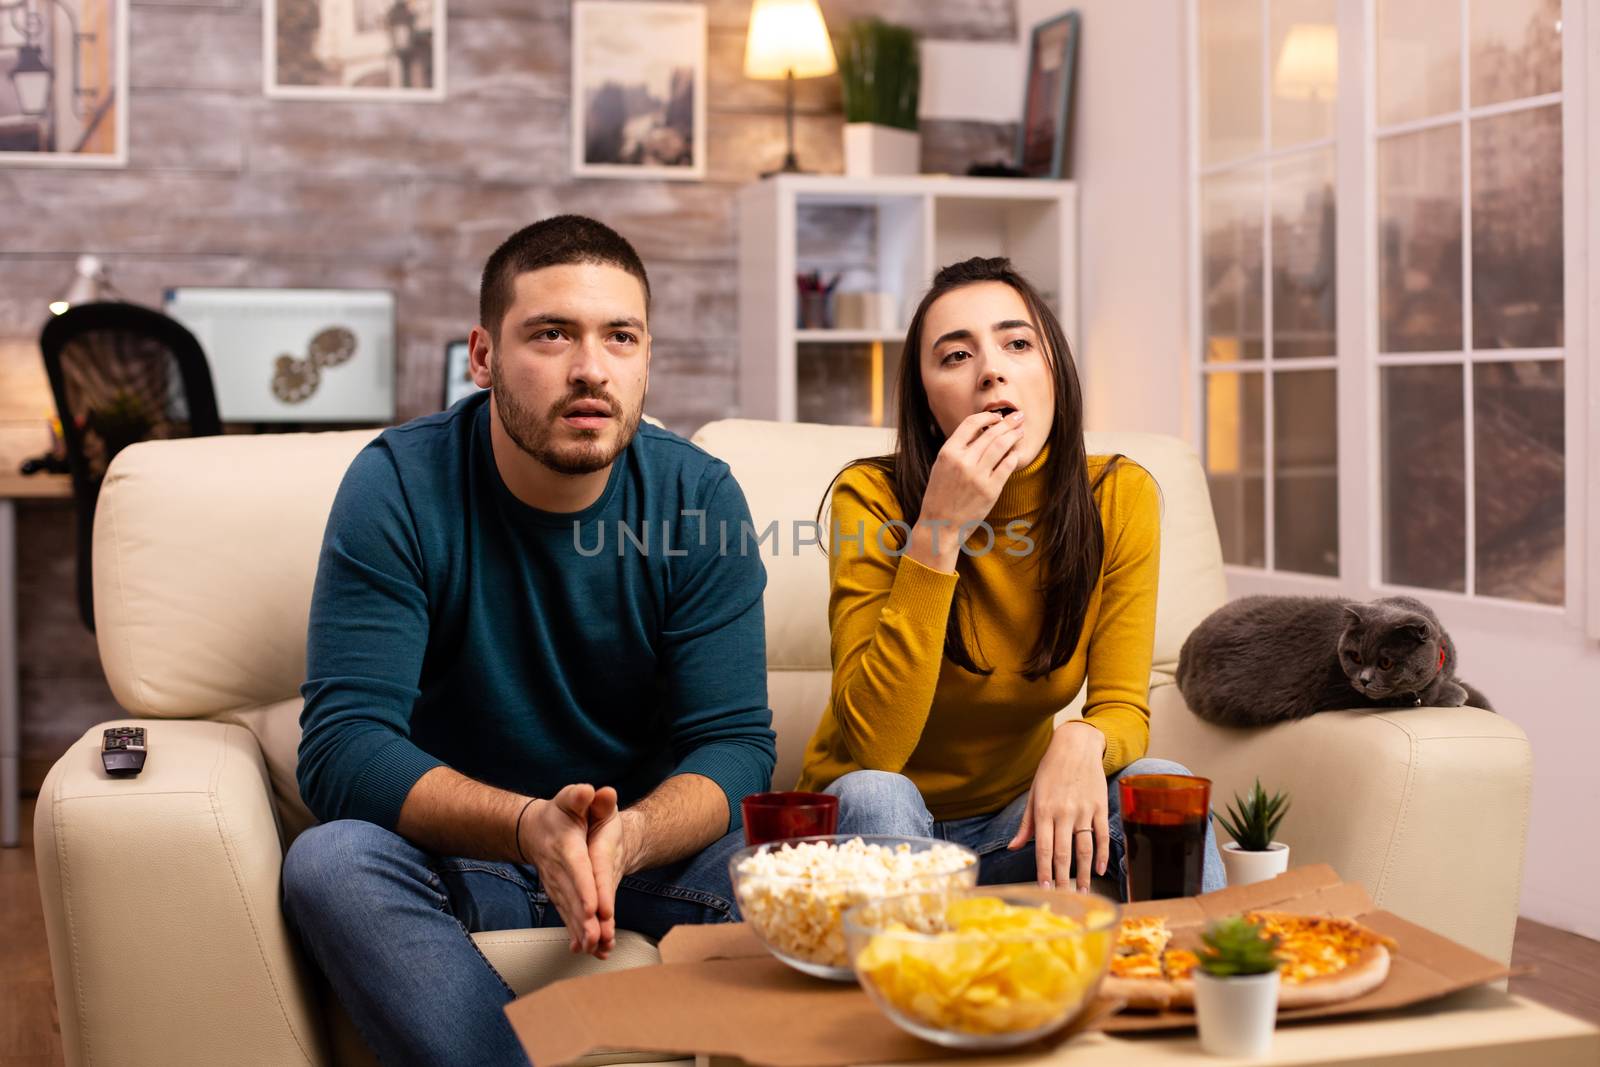 Couple cheering for their favourite team while watching TV and eating fast food